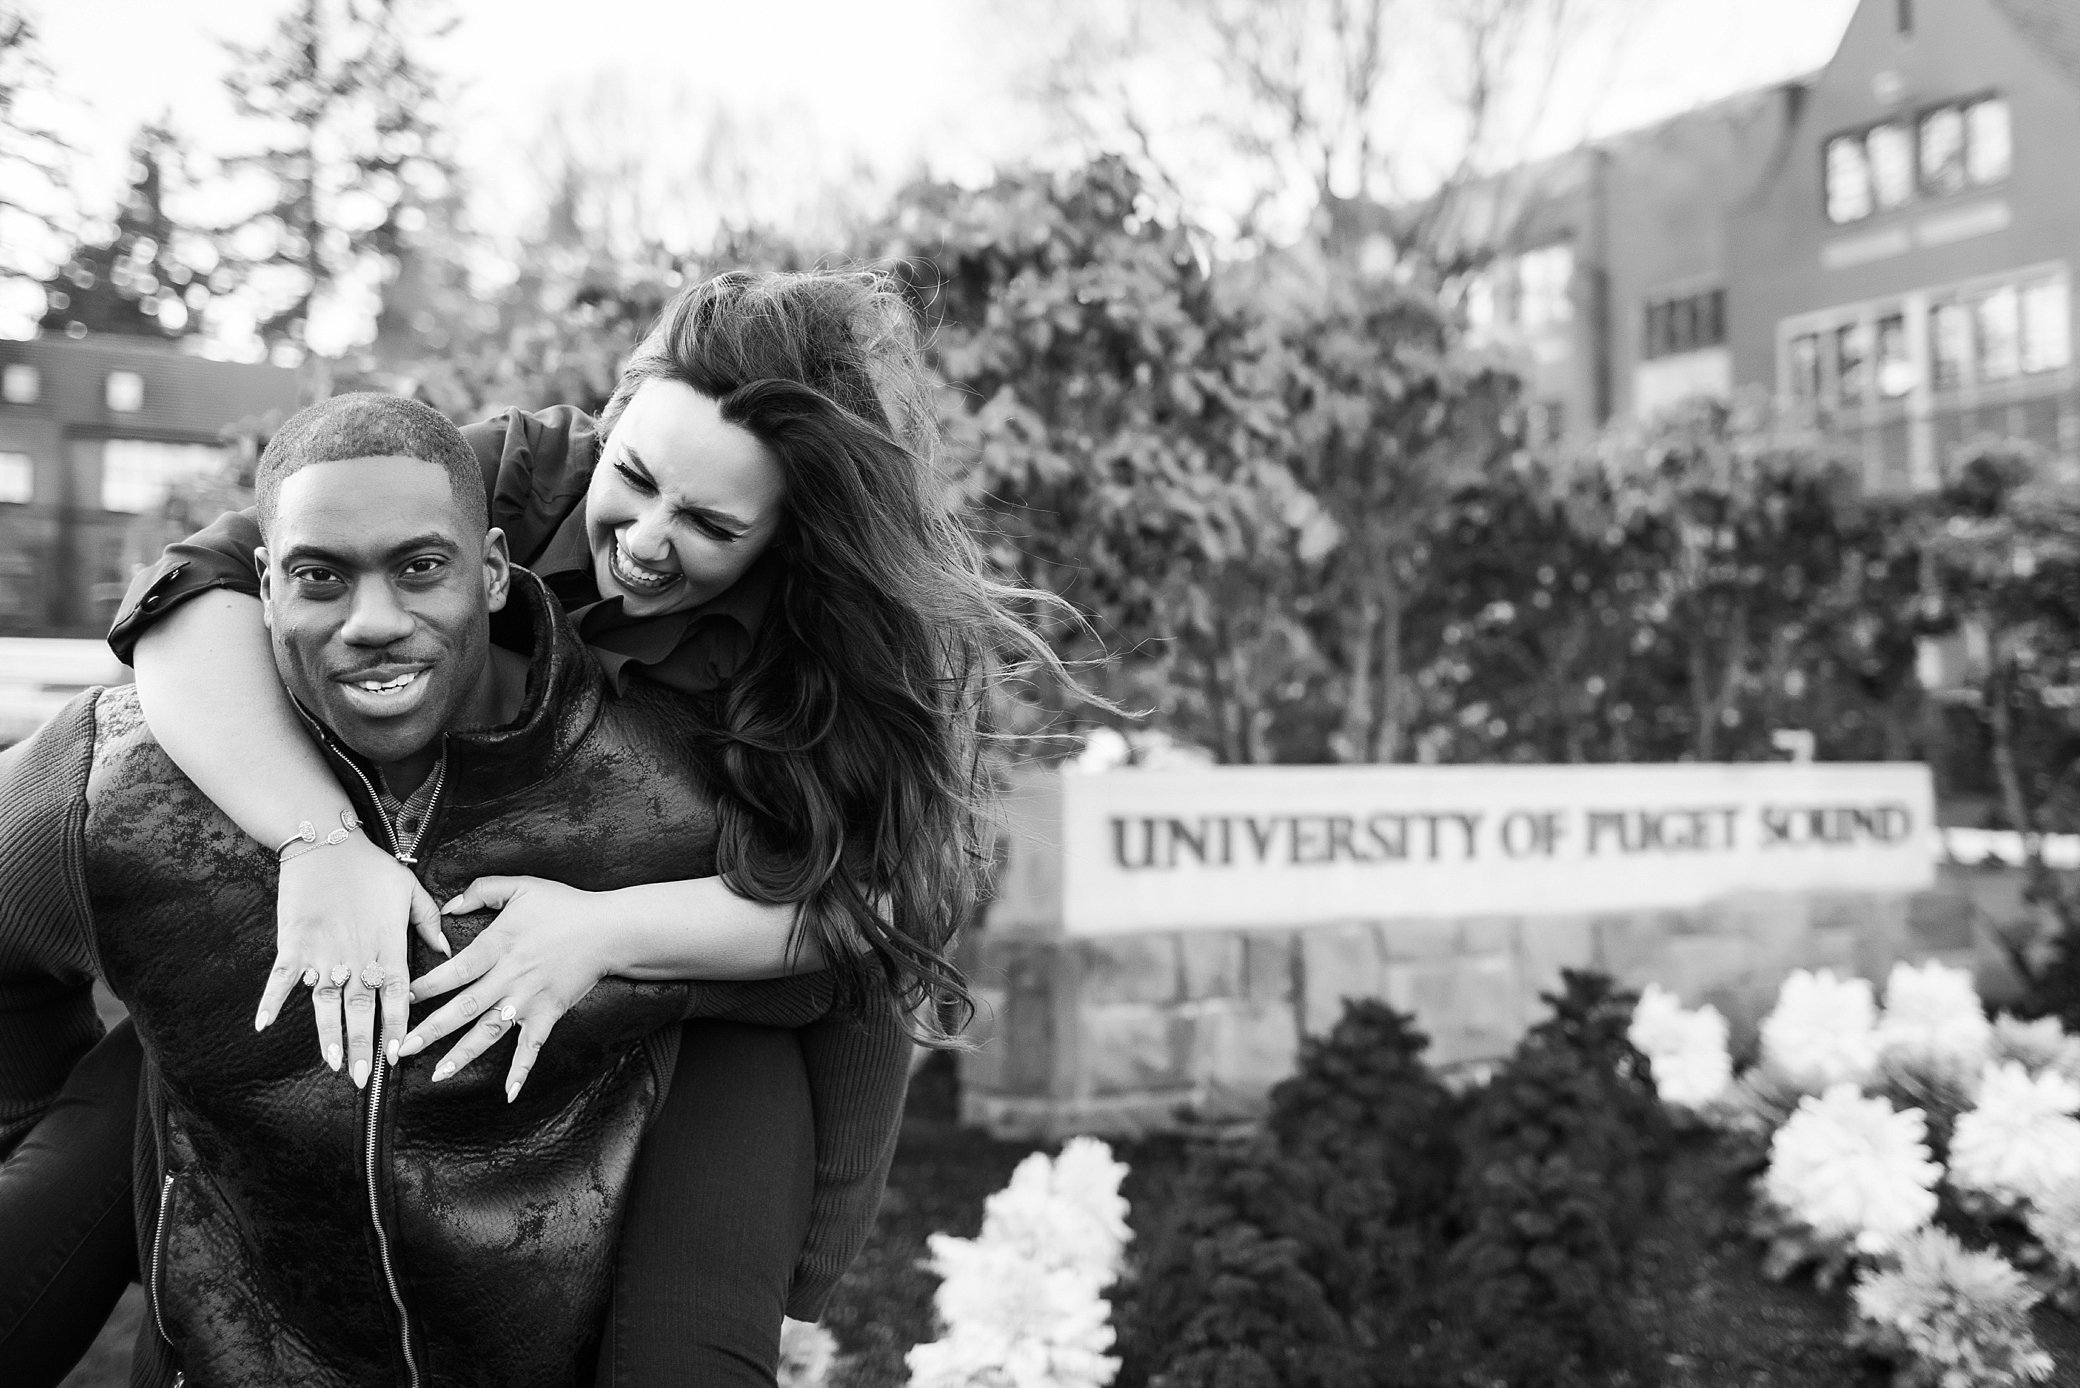 Couple in front of University of Puget Sound | Megan Montalvo Photography